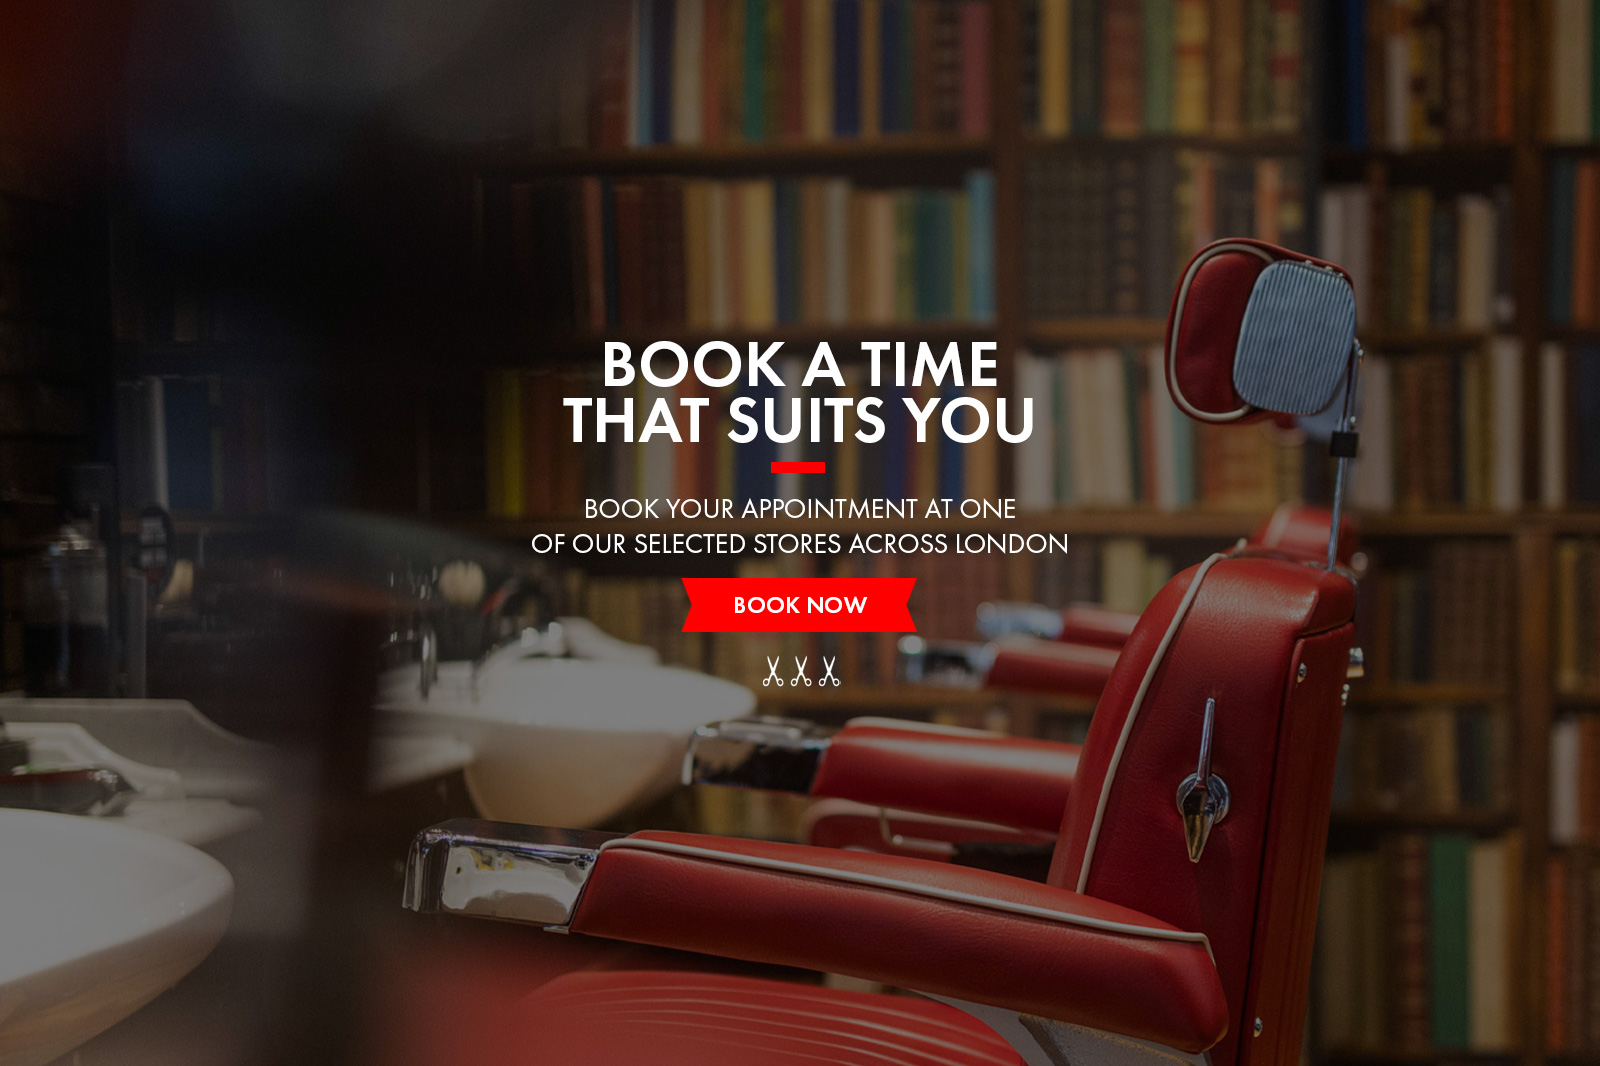 Book a time that suits you